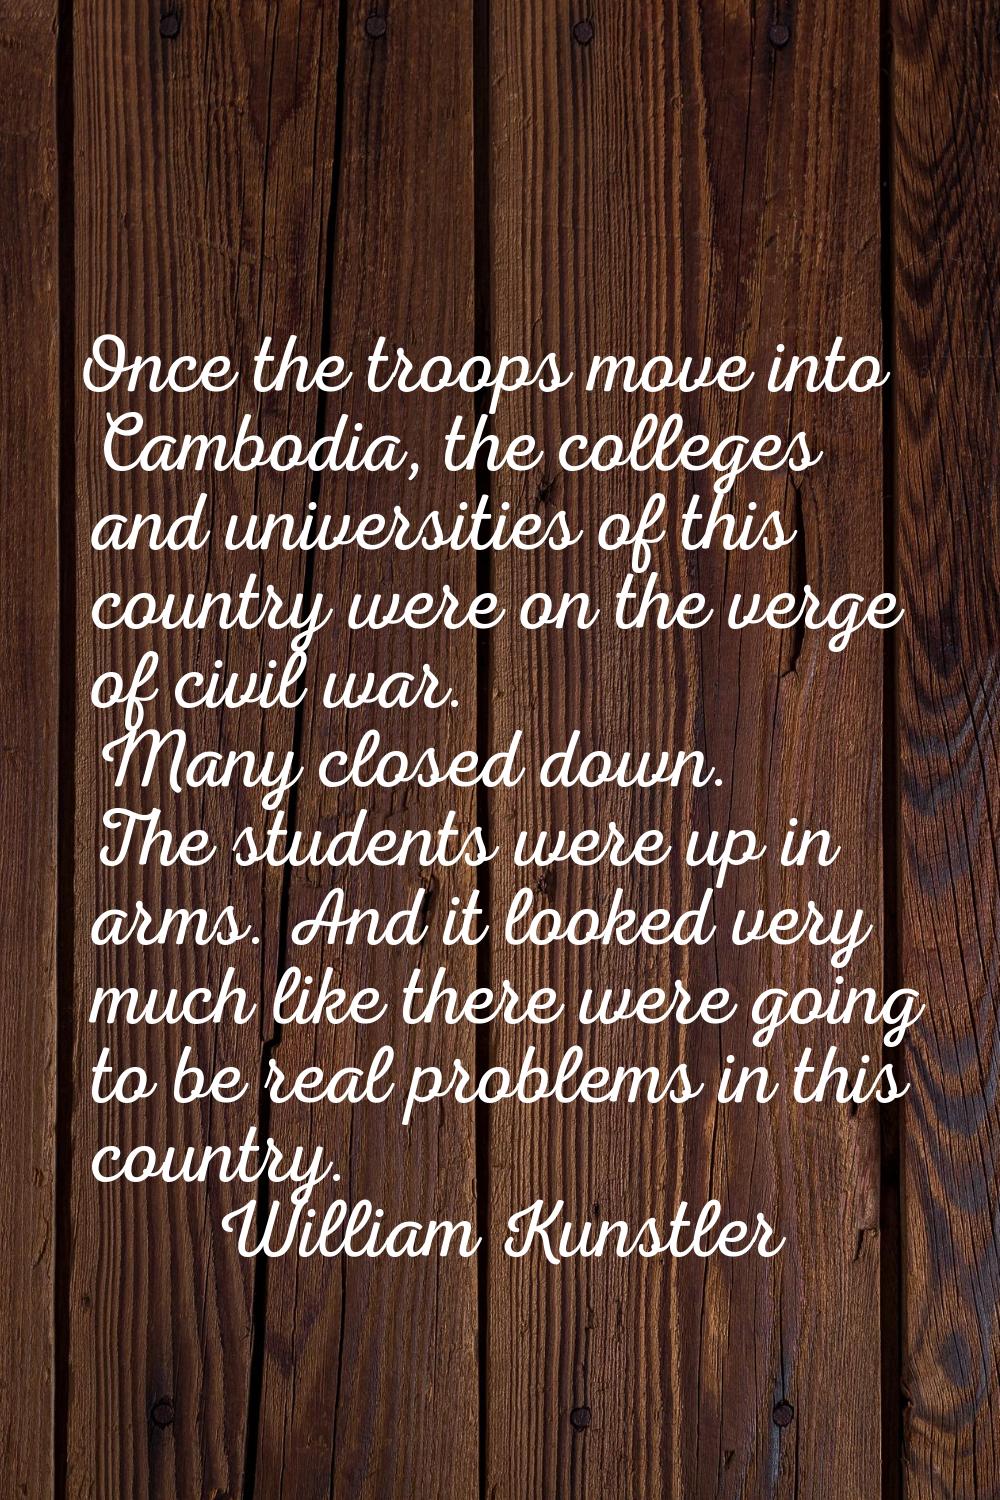 Once the troops move into Cambodia, the colleges and universities of this country were on the verge